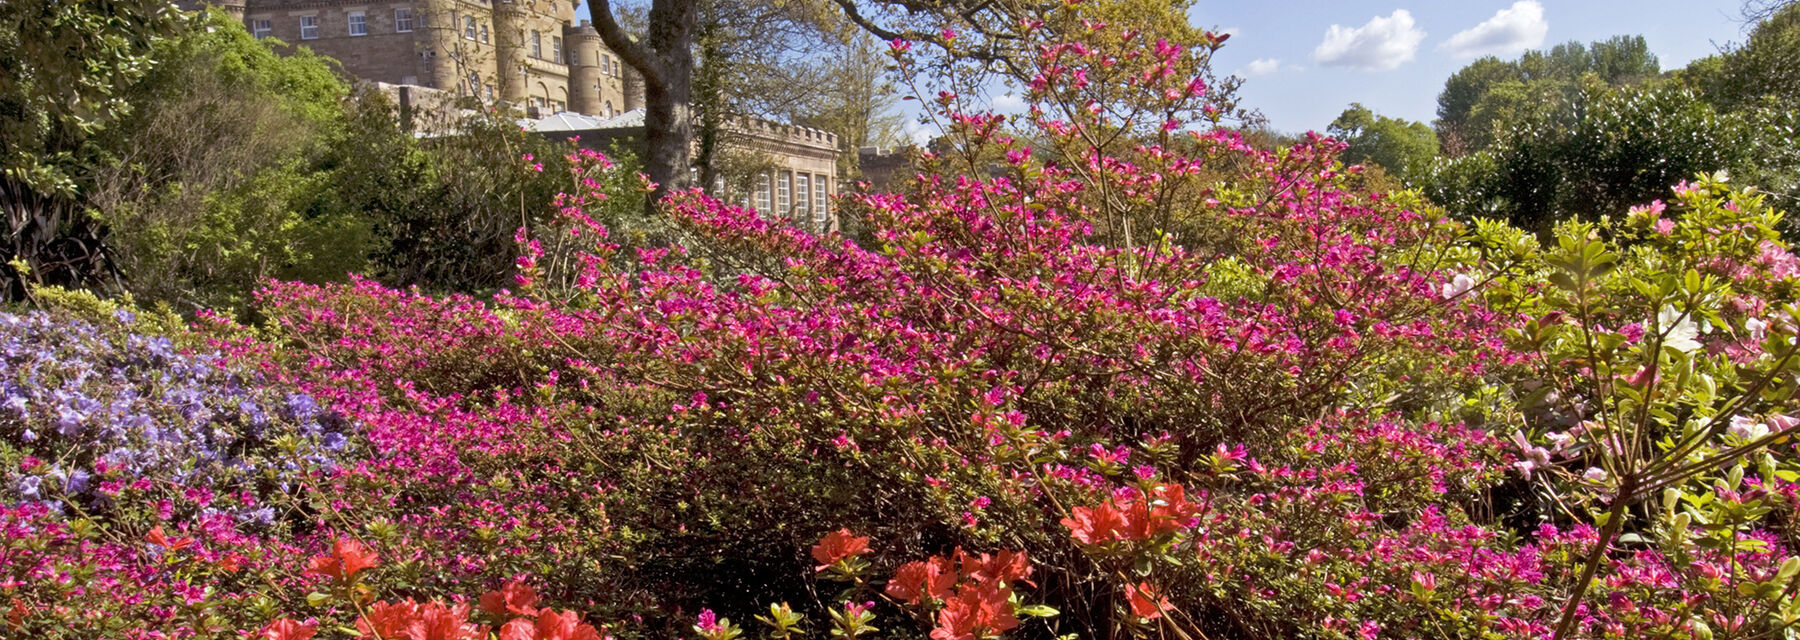 A bright and colourful display of flowers, with Culzean Castle seen in the background on a sunny day.